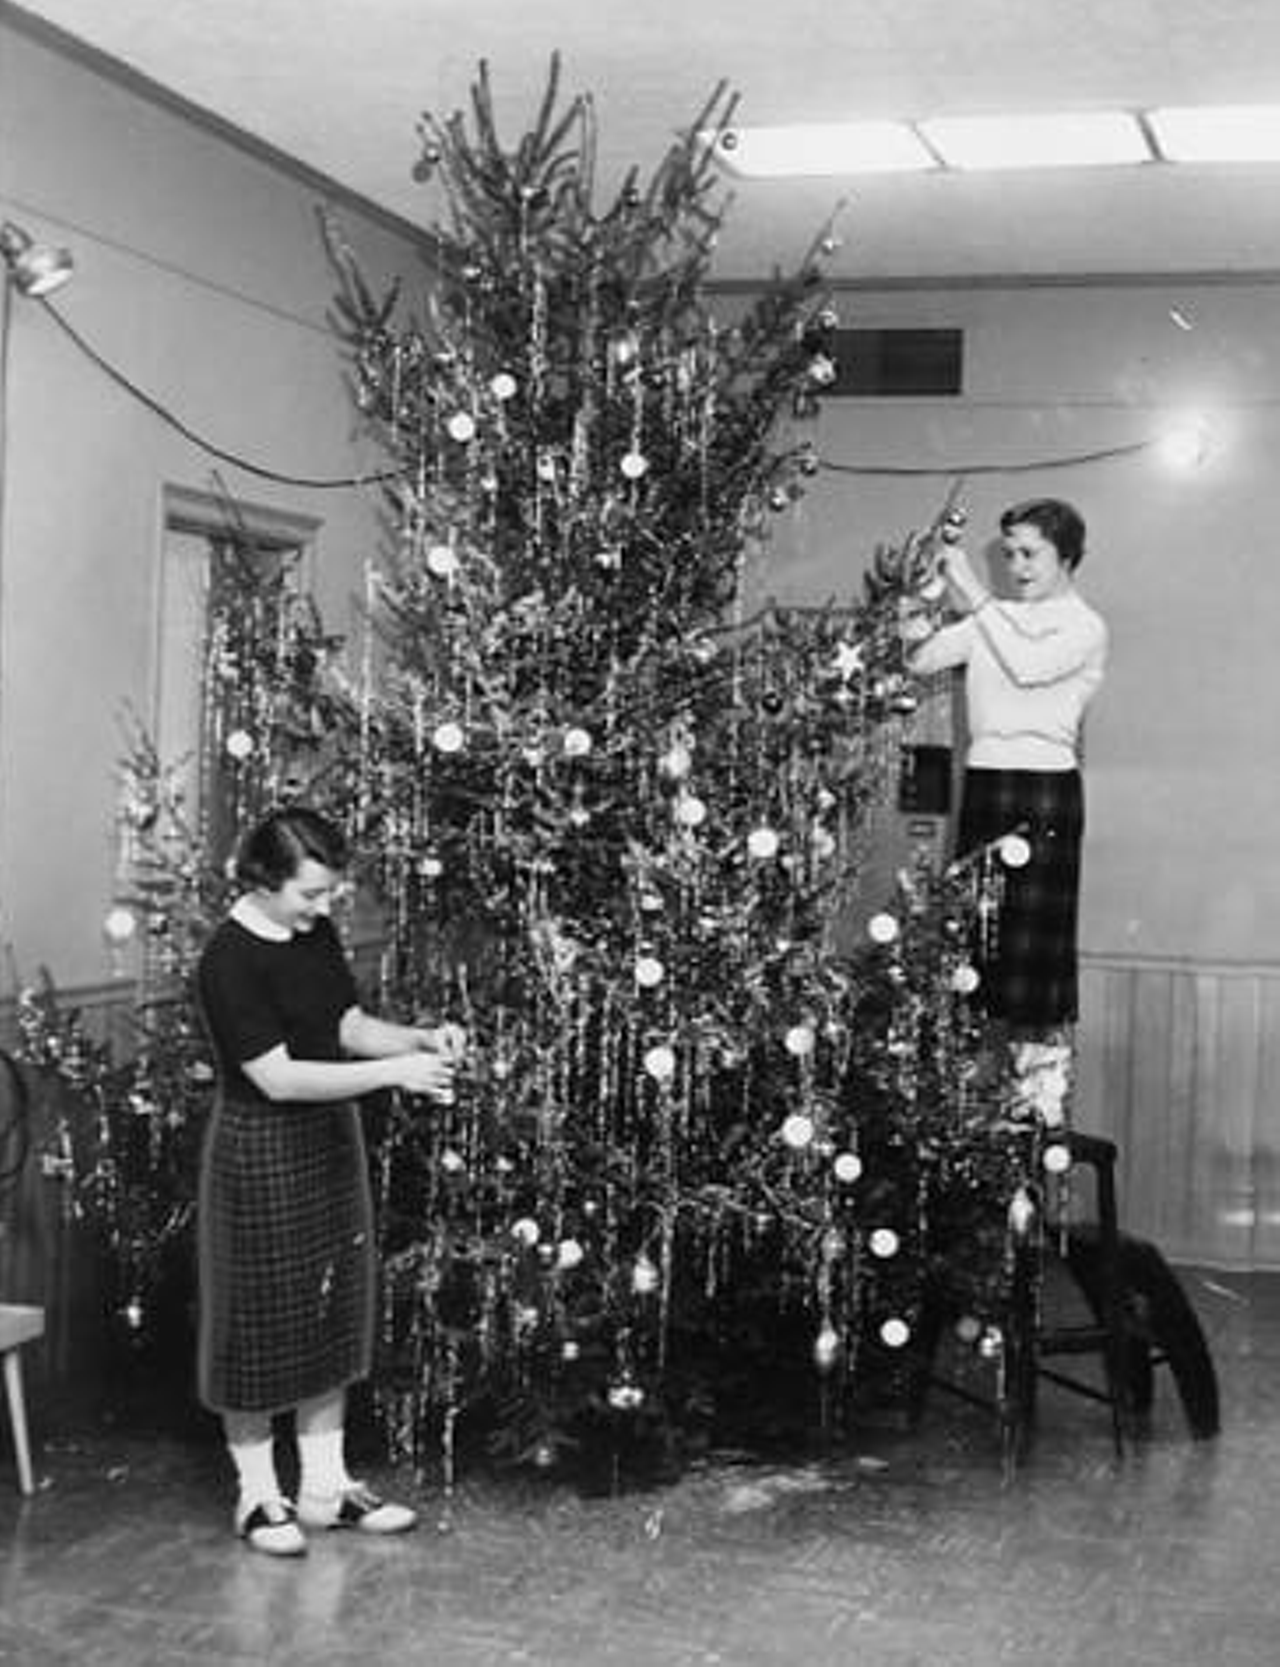 1955: Christmas decorations brighten up the Shaker Heights High School social room during the holiday season.